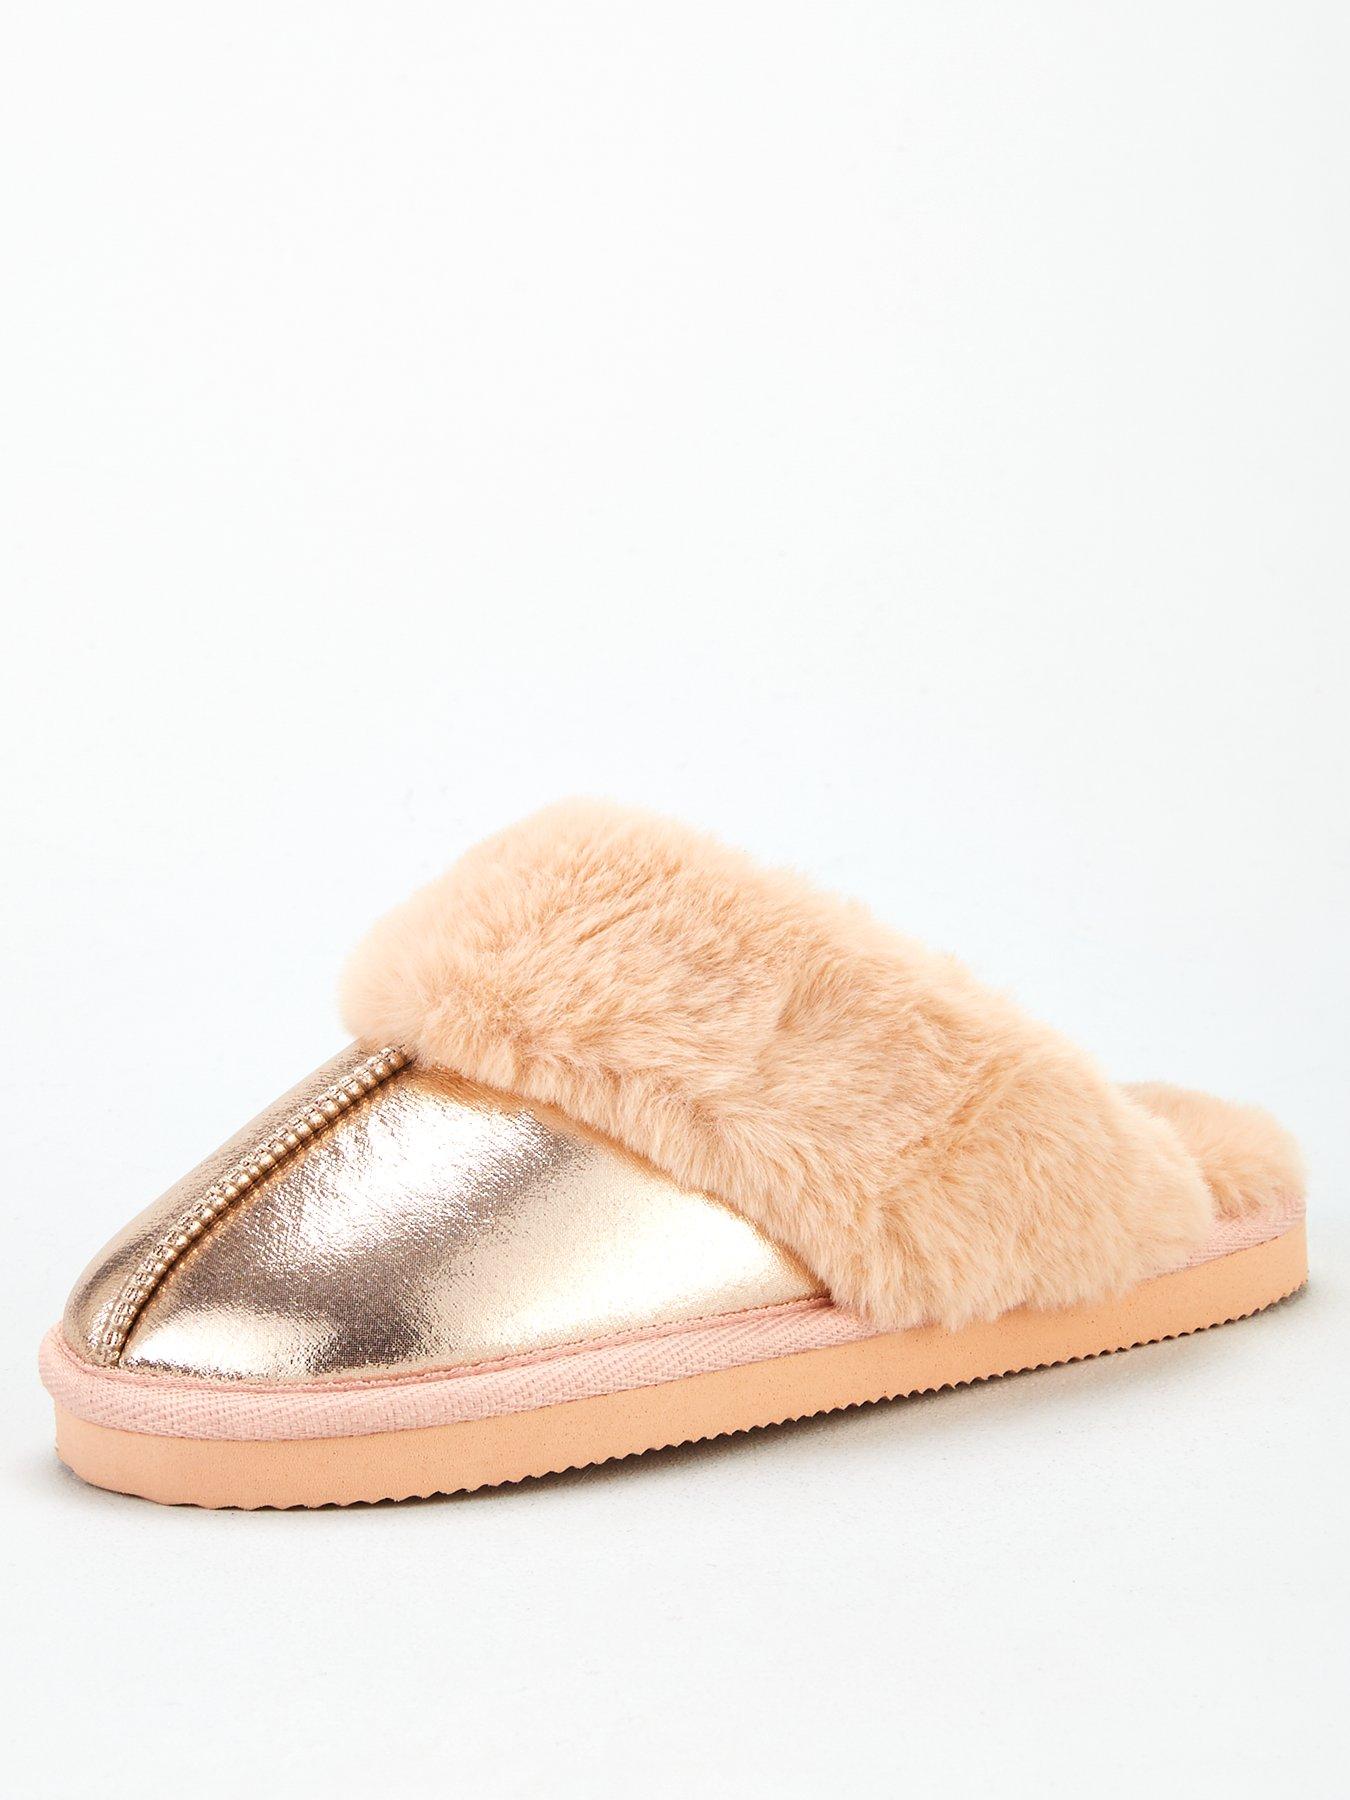 gold mule slippers